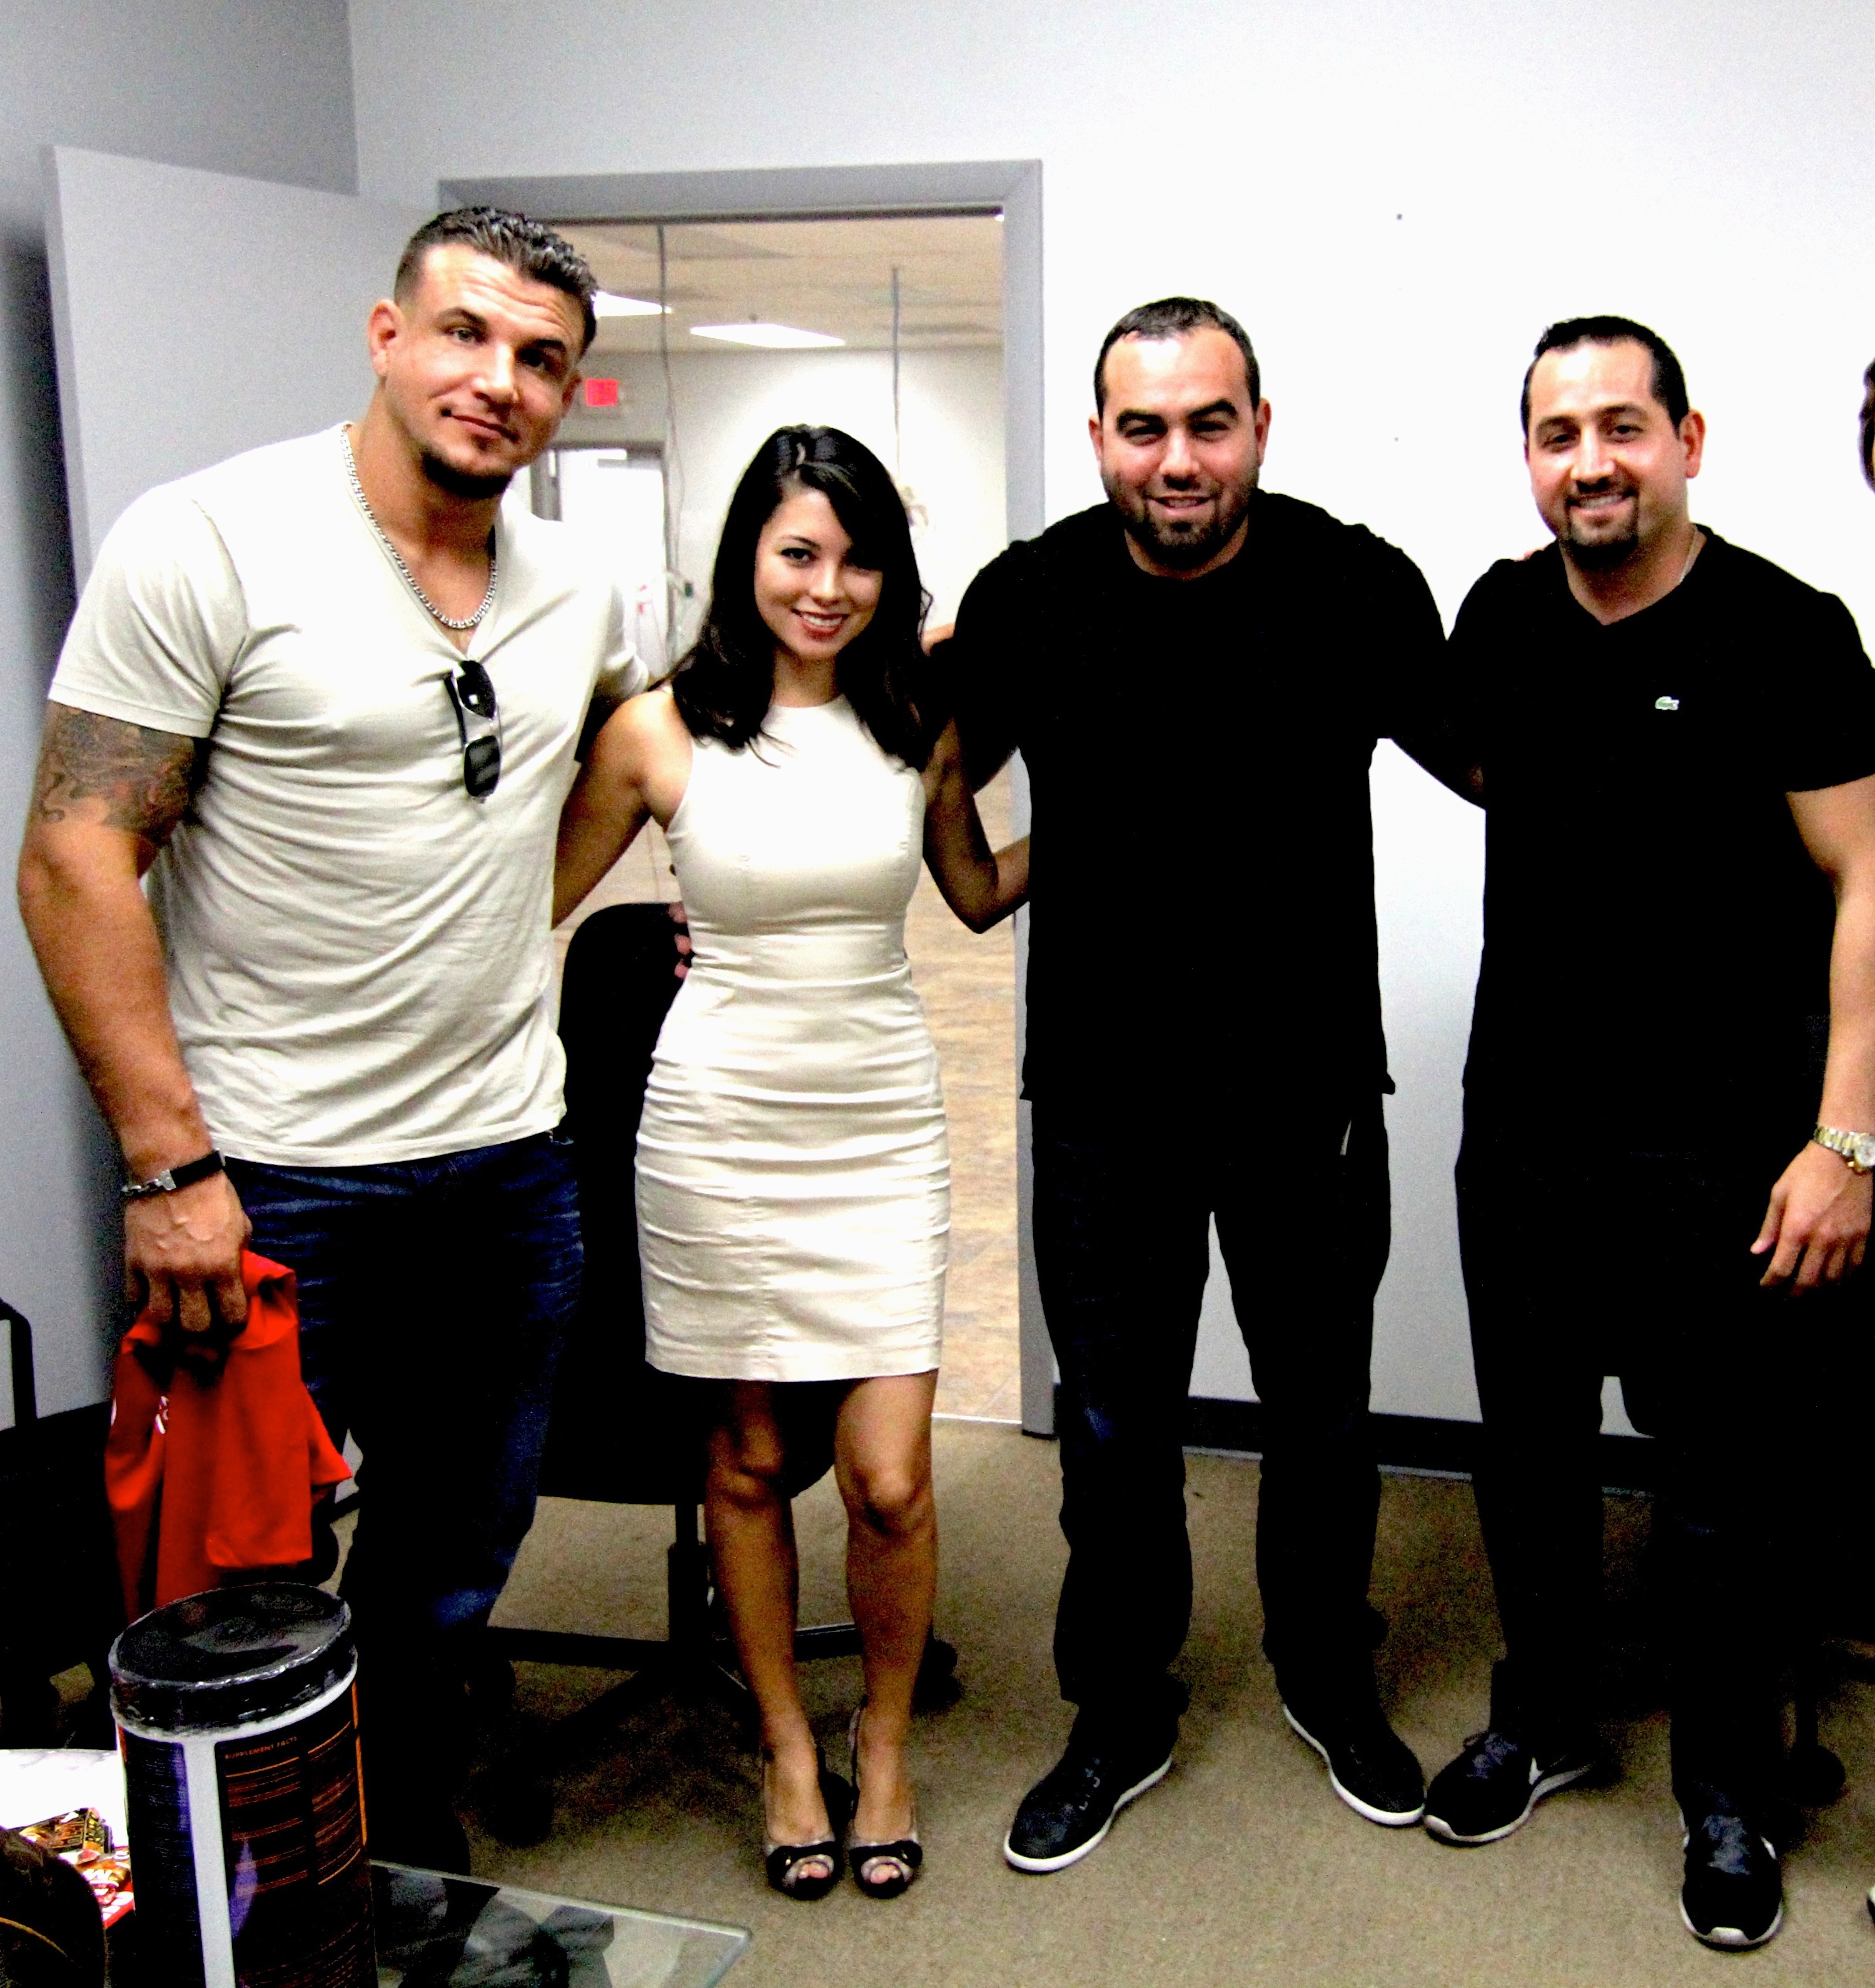 UFC Fighter Frank Mir with Catherine Colle VP of Operations and his agents.